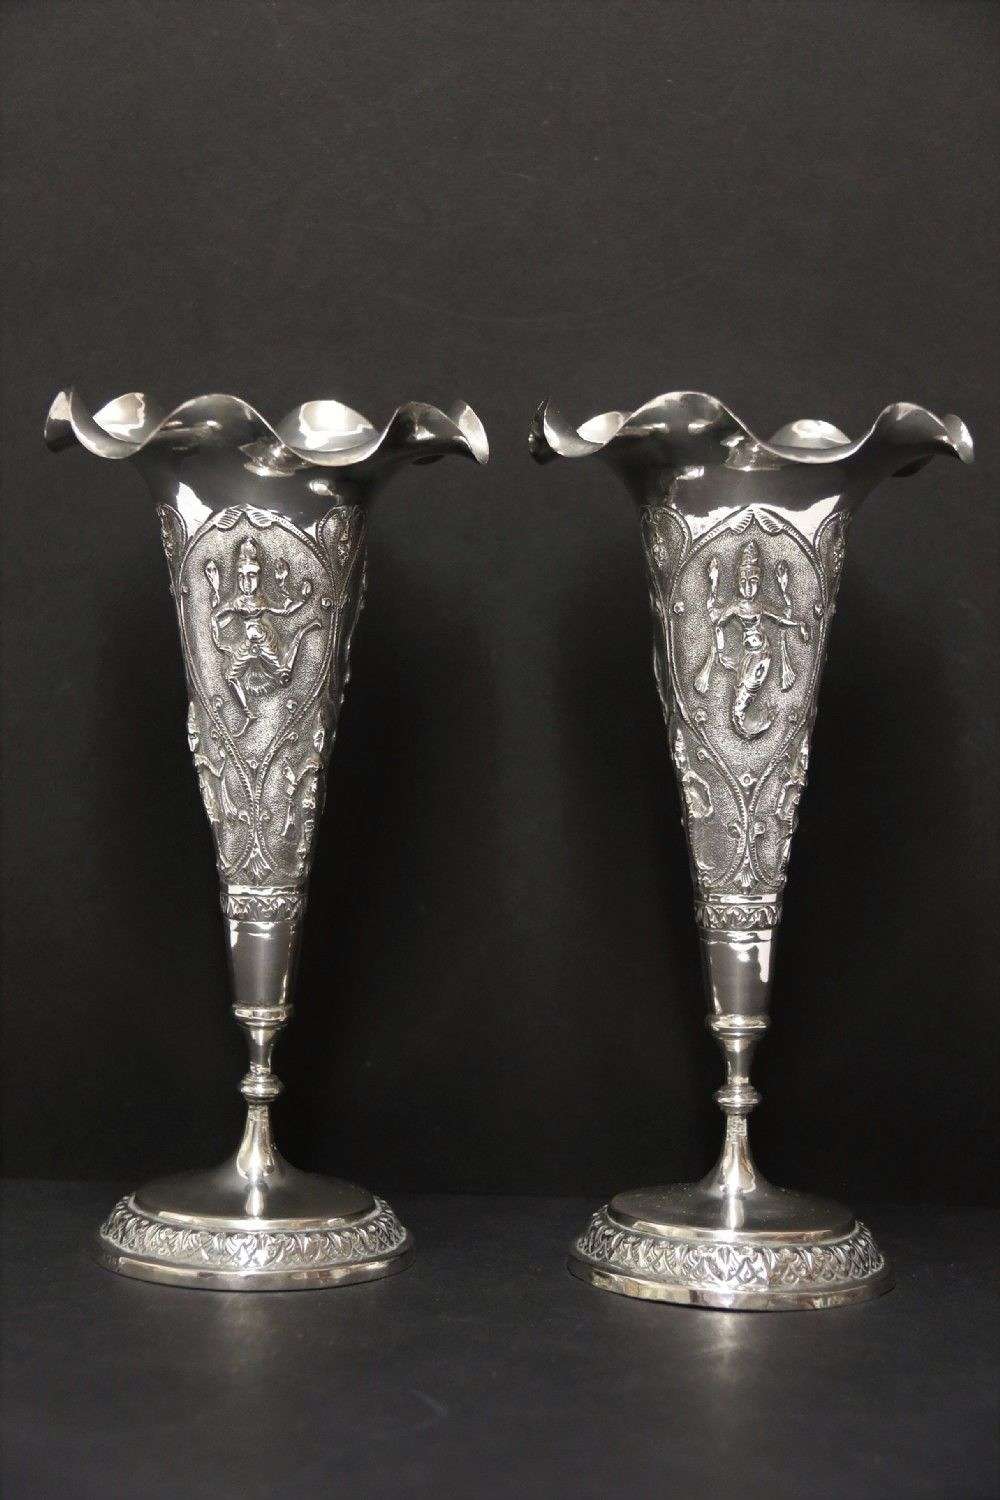 A Fine Pair Of 19th Century Raj Period Indian Silver Vases